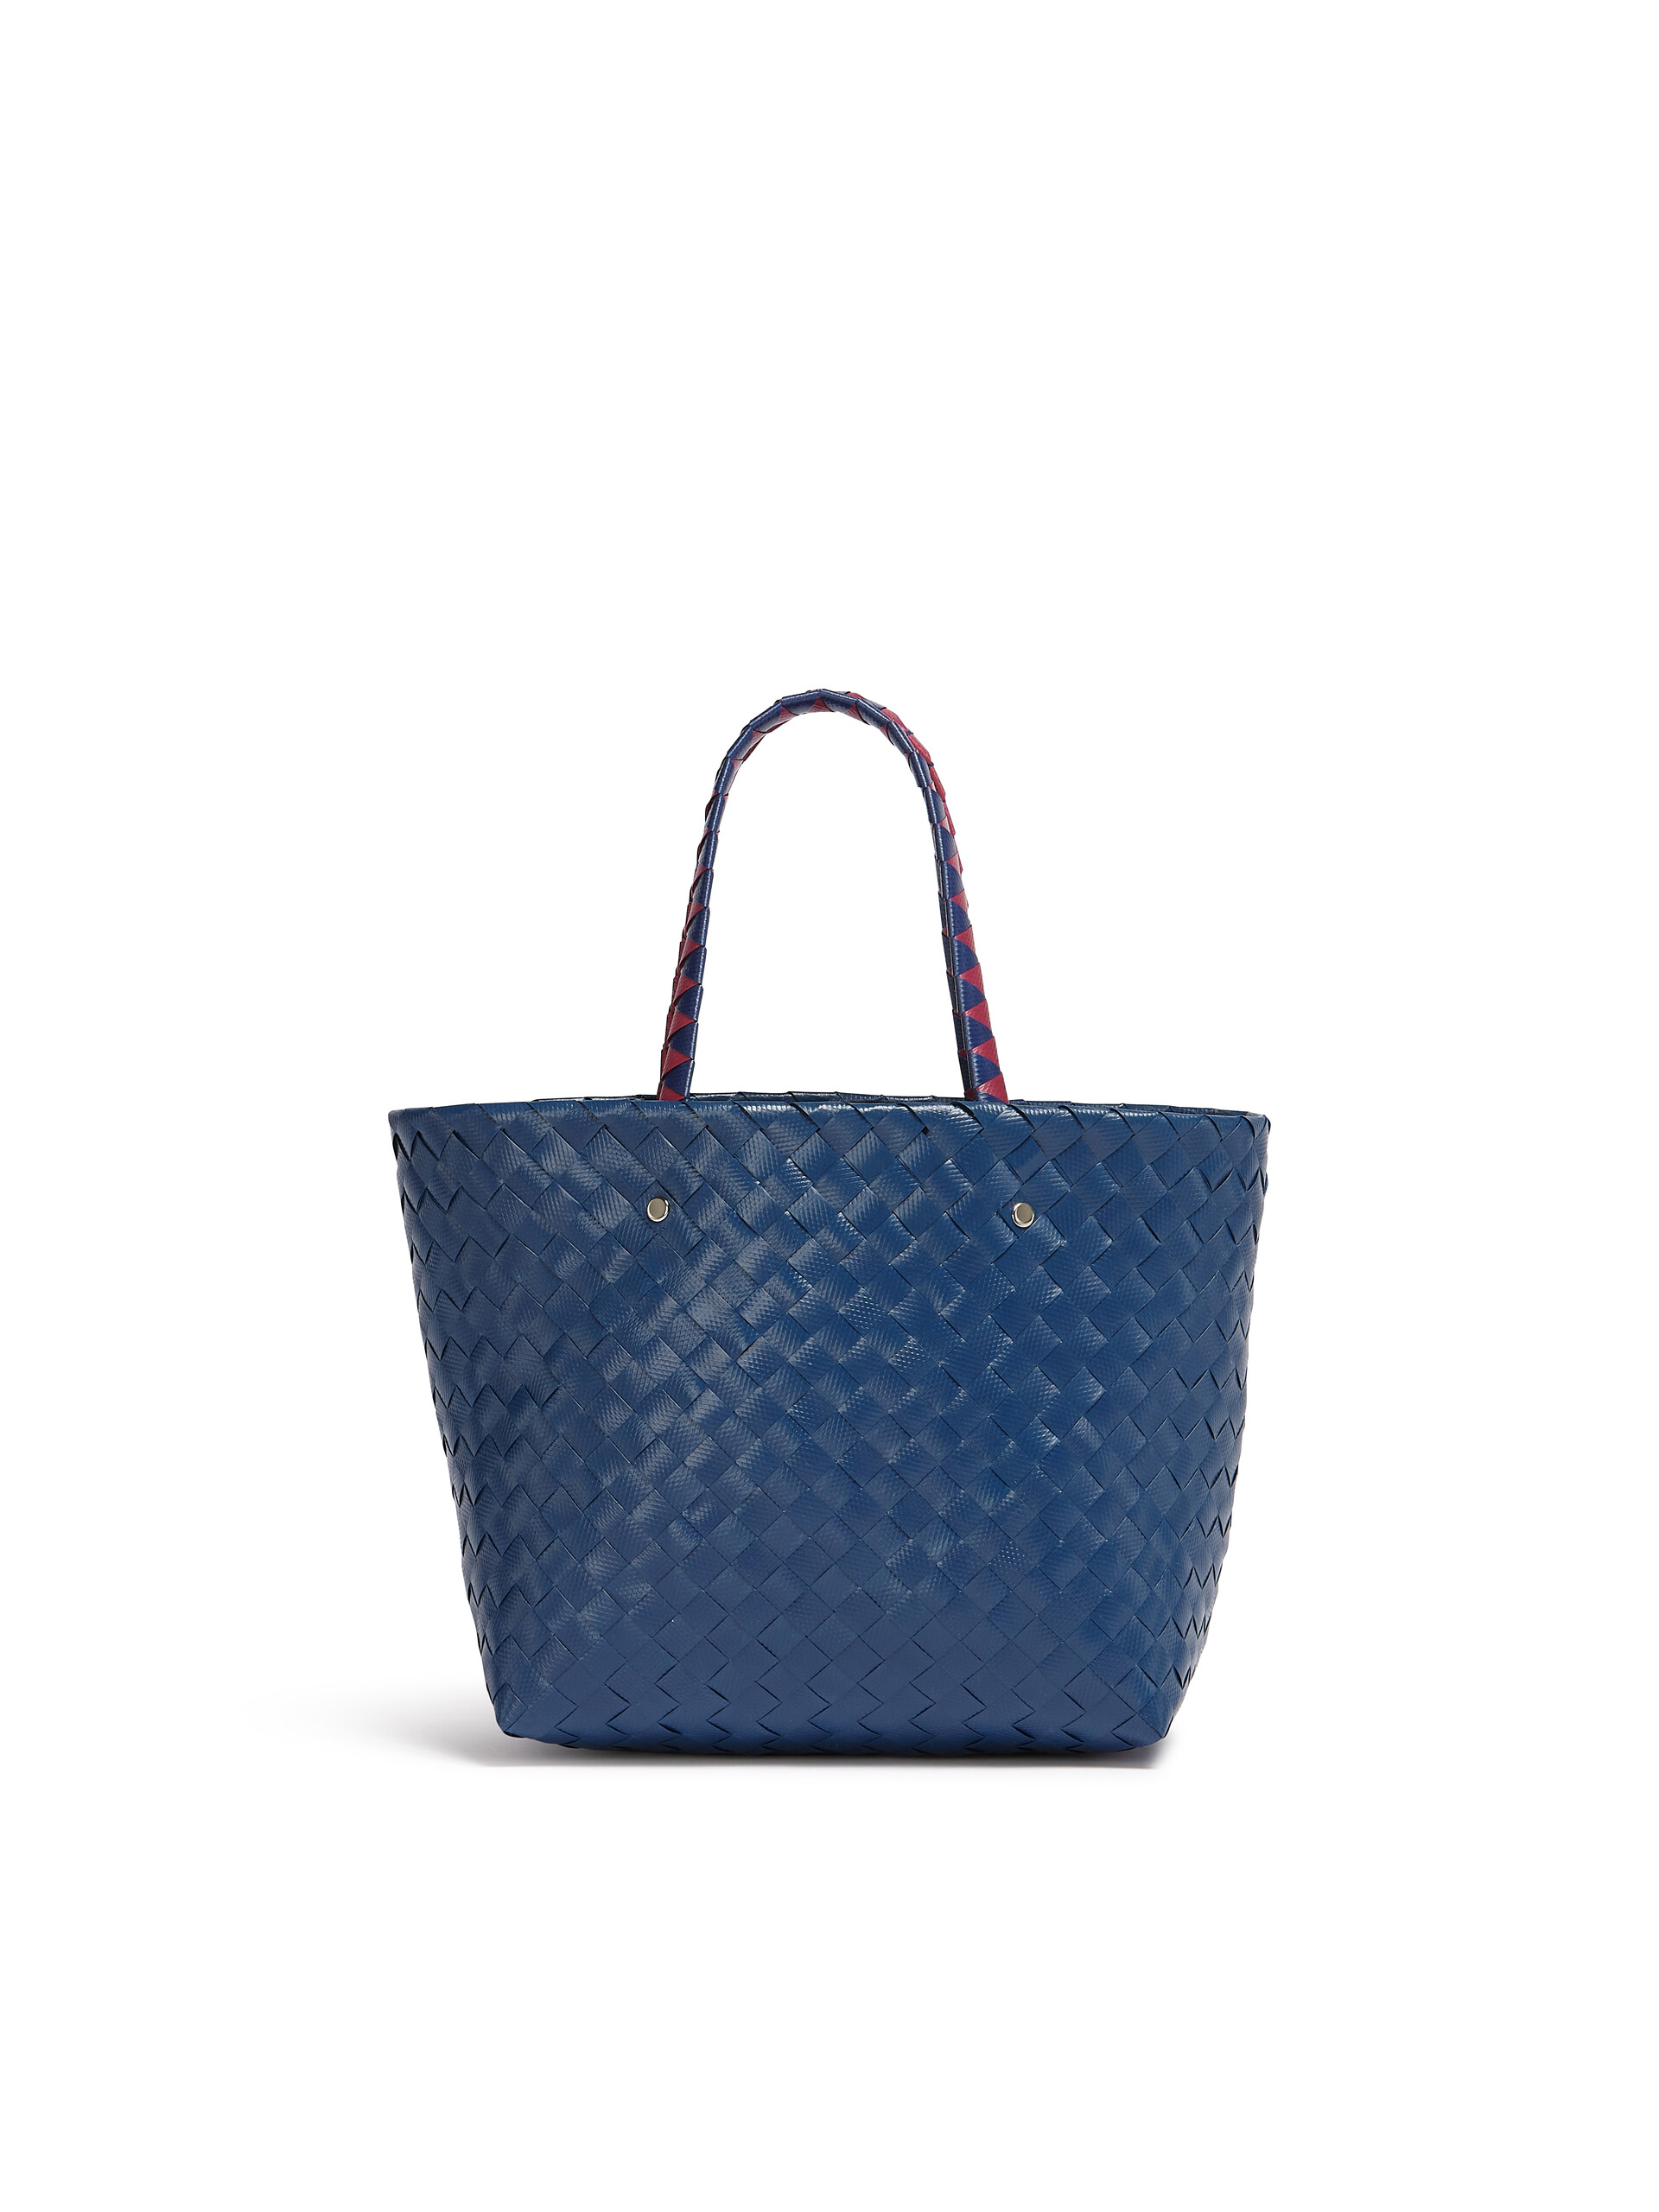 MARNI MARKET small bag in blue flower motif - Shopping Bags - Image 3